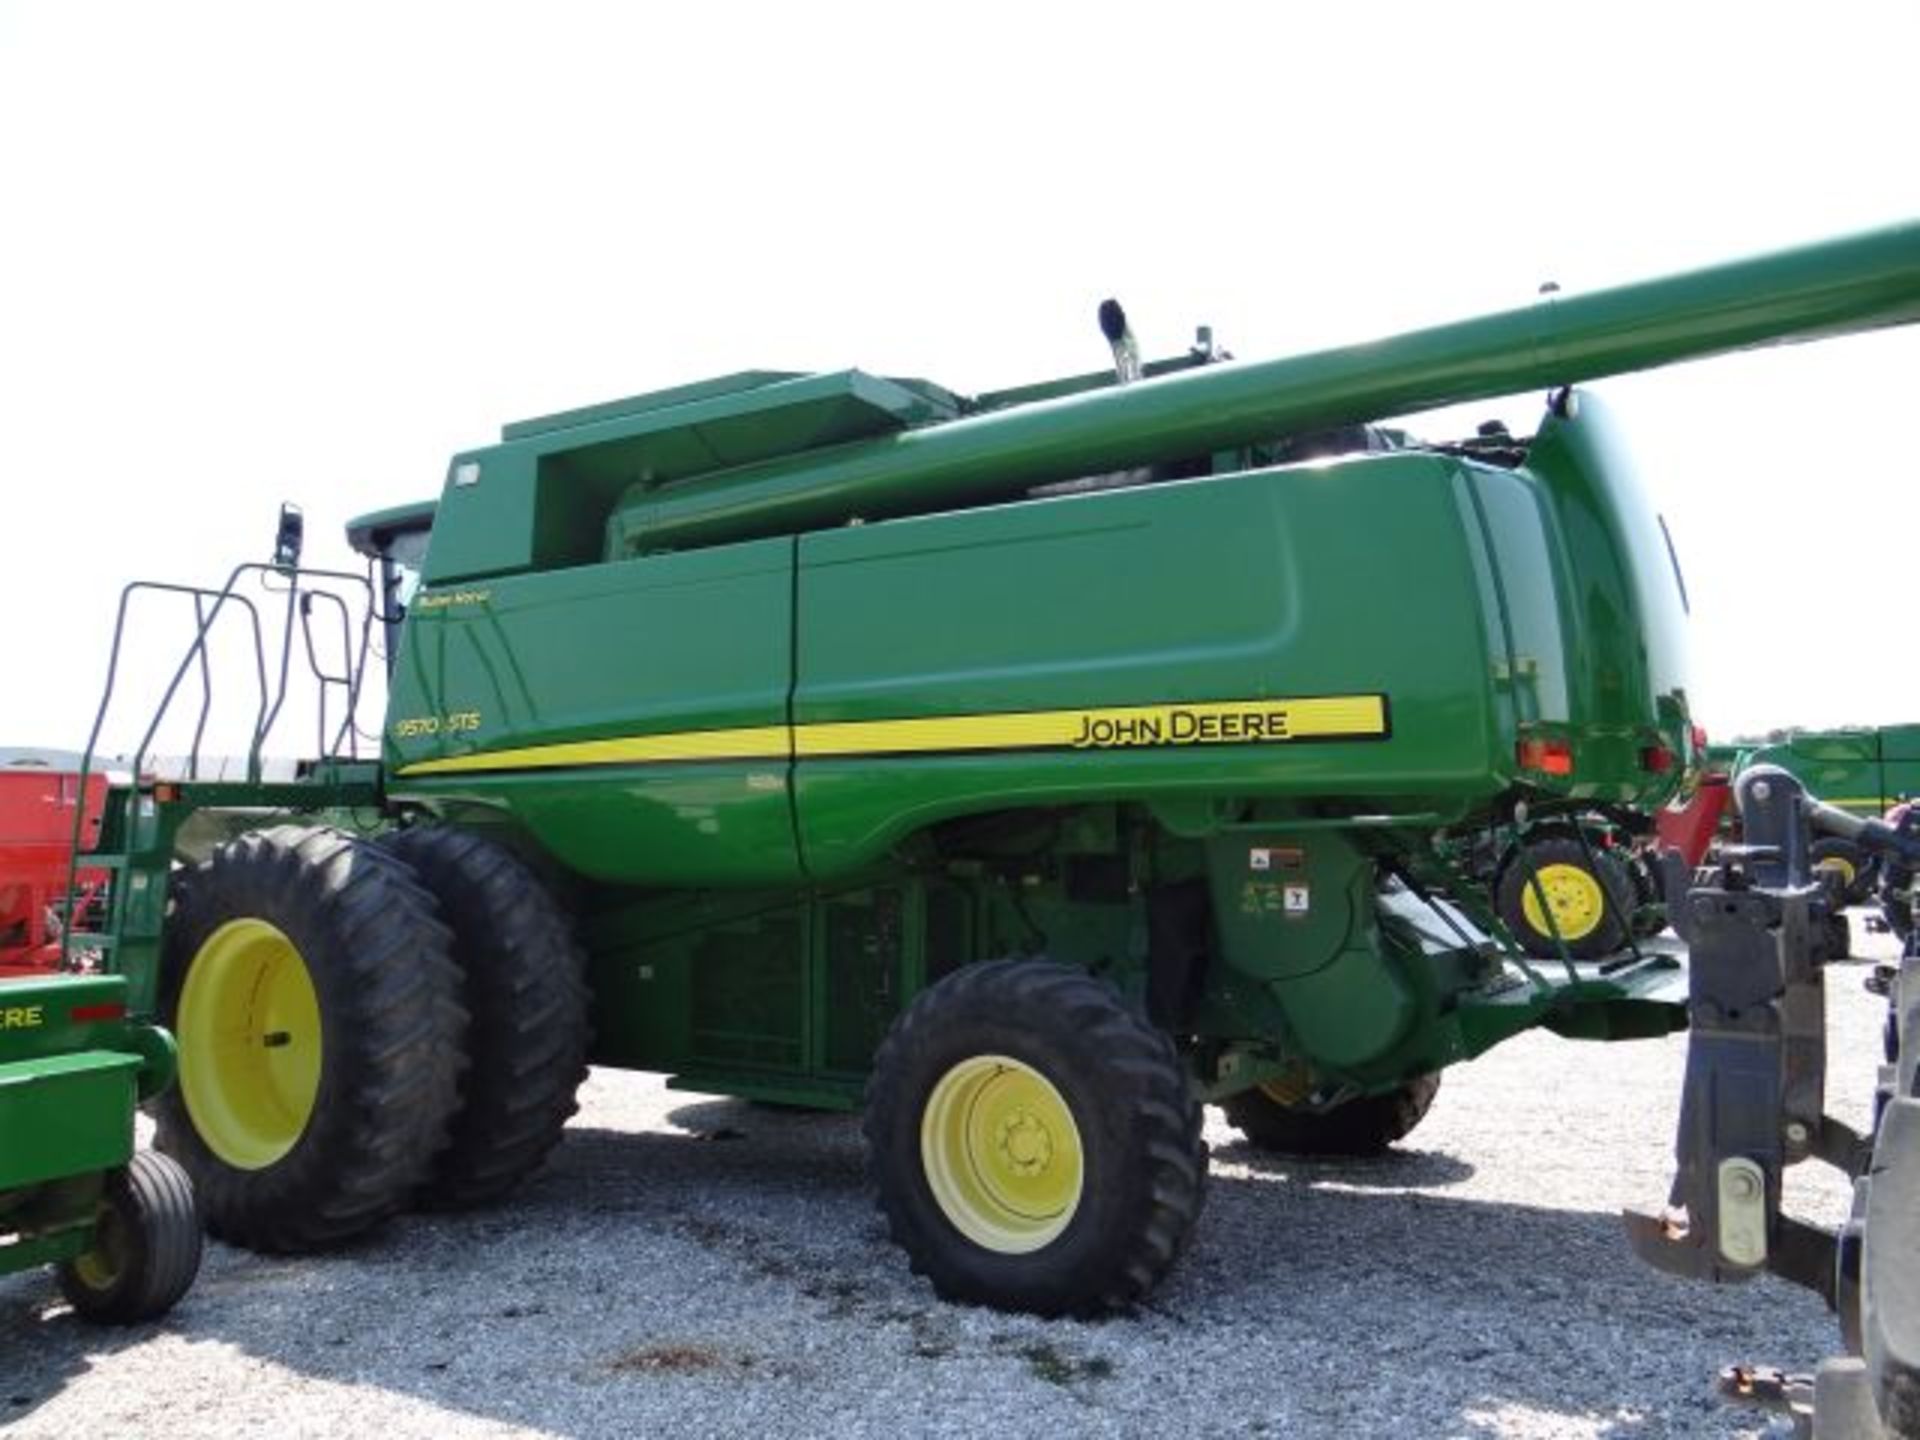 JD 9570 STS Combine, 2008 2841/1460 hrs, 2wd, LL, Chopper, 520/85R42 Duals - Image 4 of 5